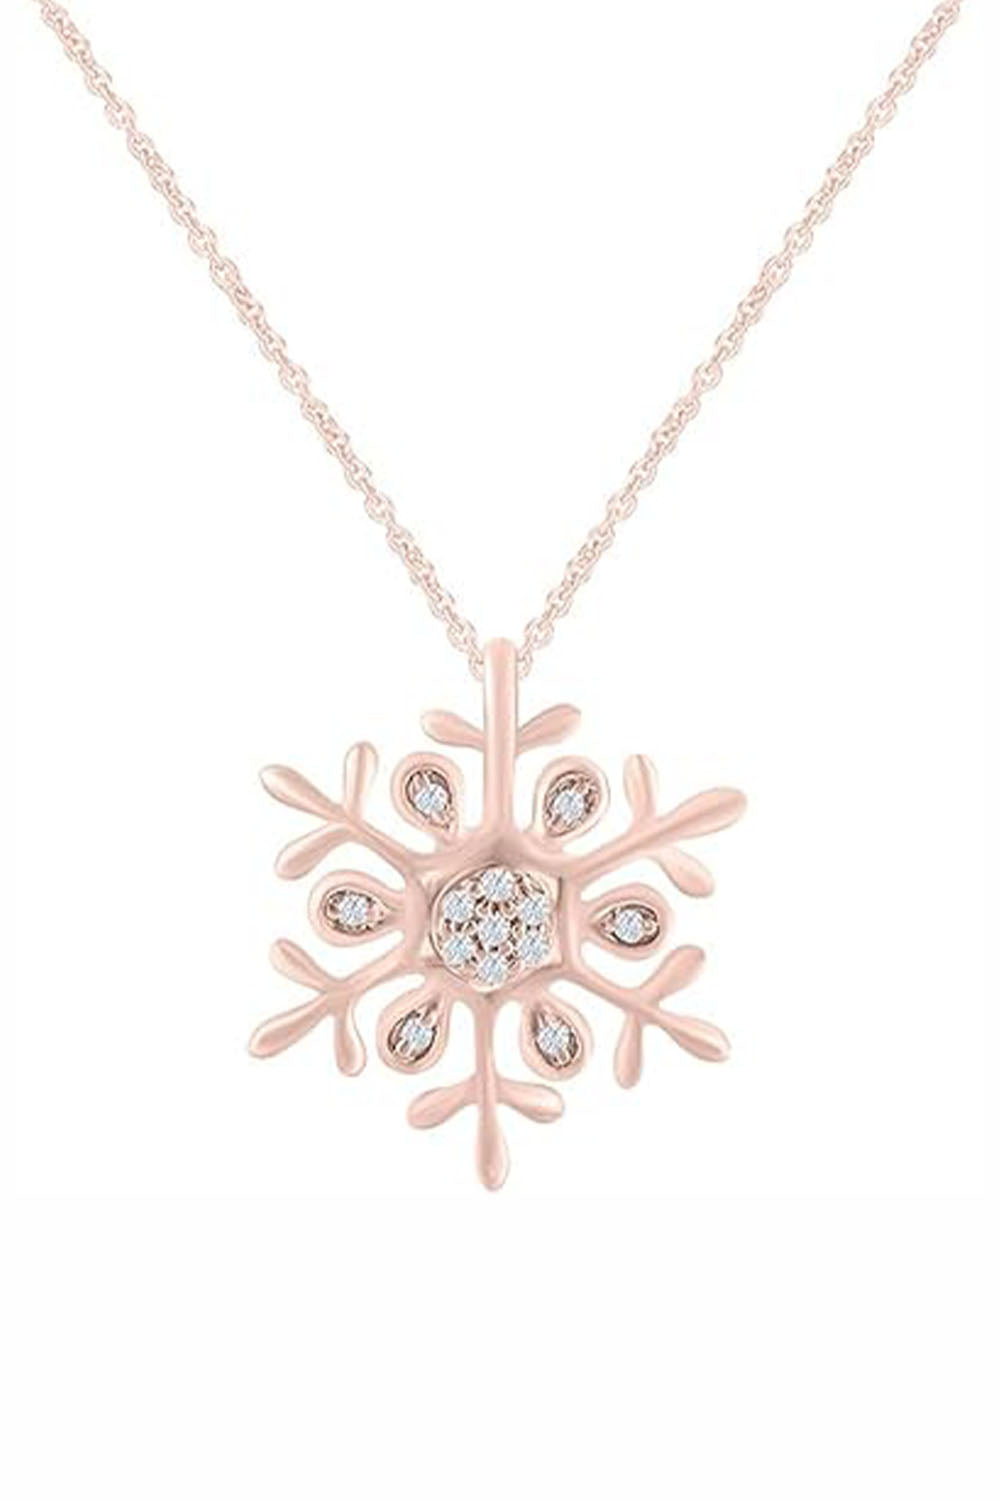 Rose Gold Color Moissanite Snowflake Pendant Necklace for Women 